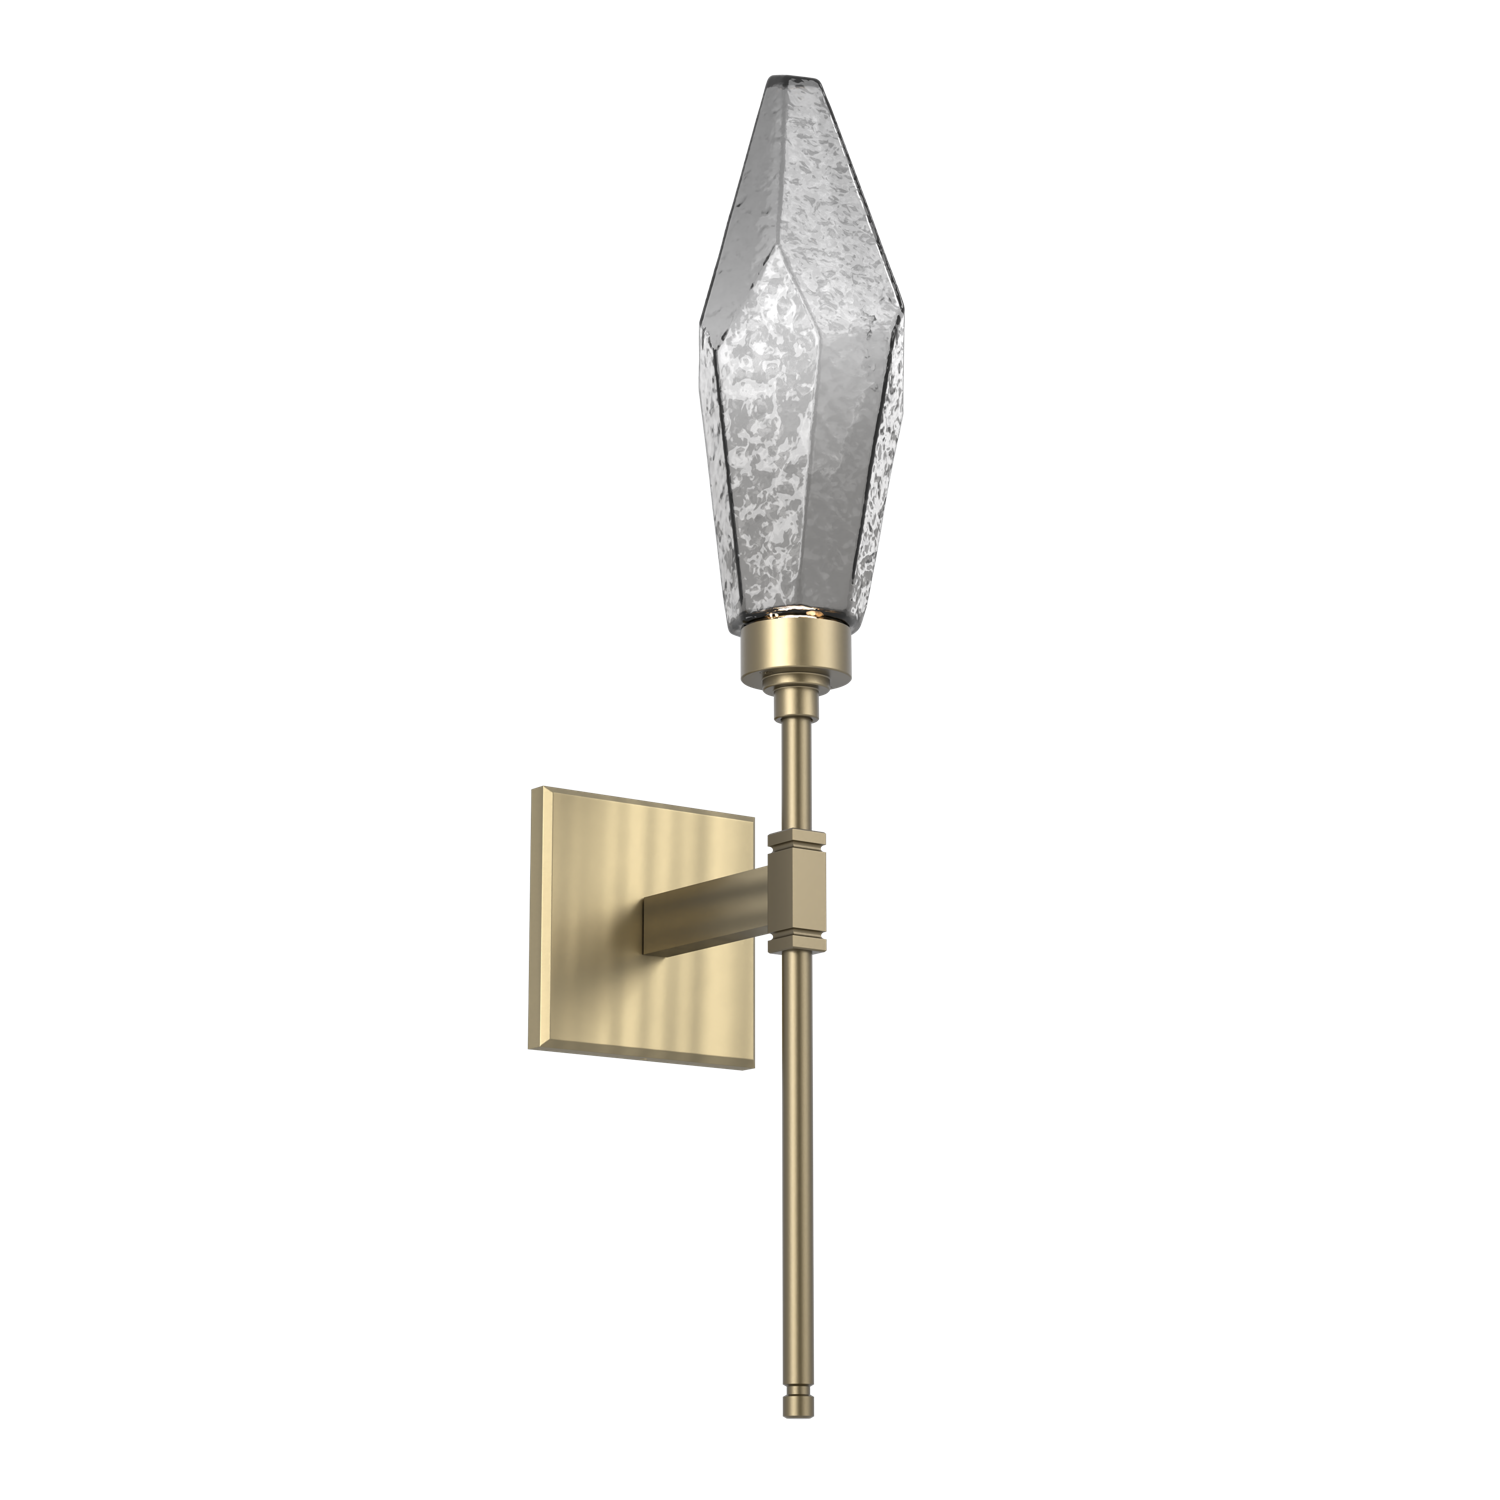 IDB0050-07-HB-CS-Hammerton-Studio-Rock-Crystal-belvedere-wall-sconce-with-heritage-brass-finish-and-chilled-smoke-glass-shades-and-LED-lamping